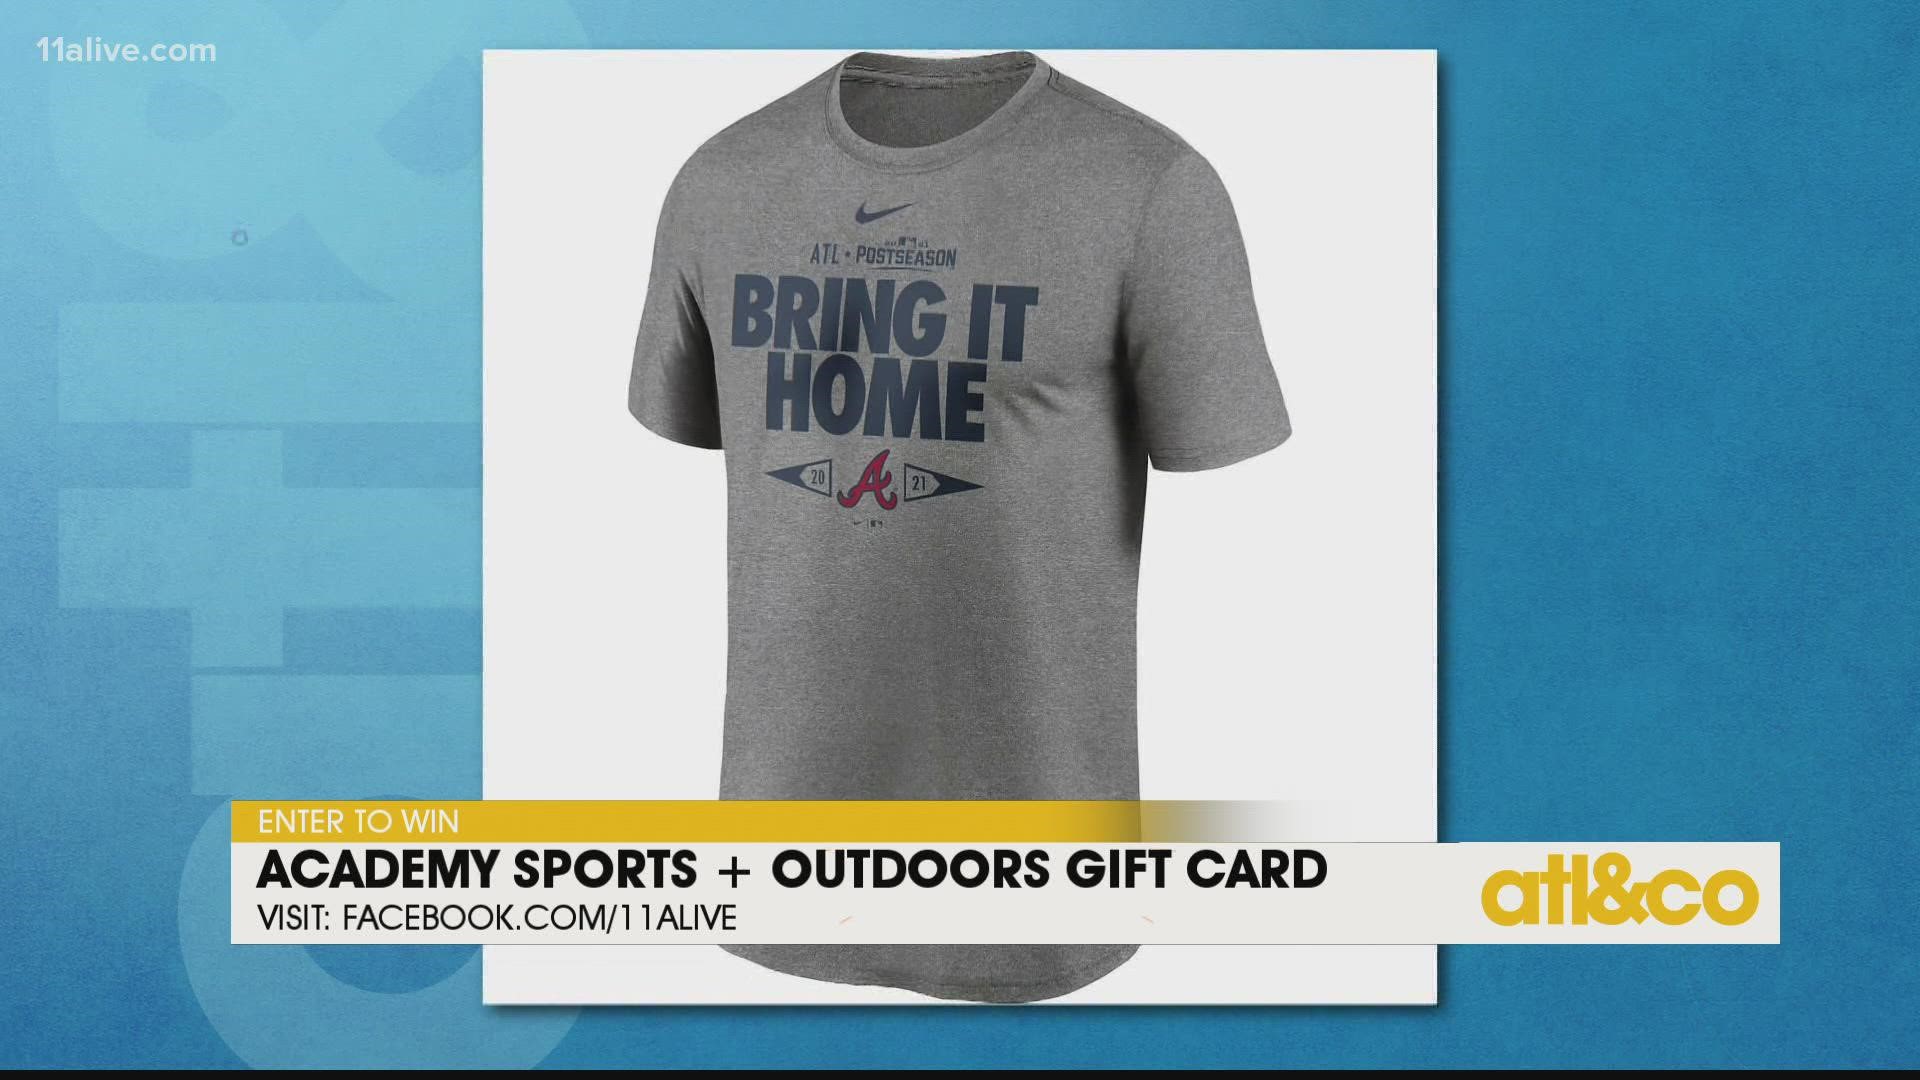 Home Run Sweepstakes with Academy Sports + Outdoors